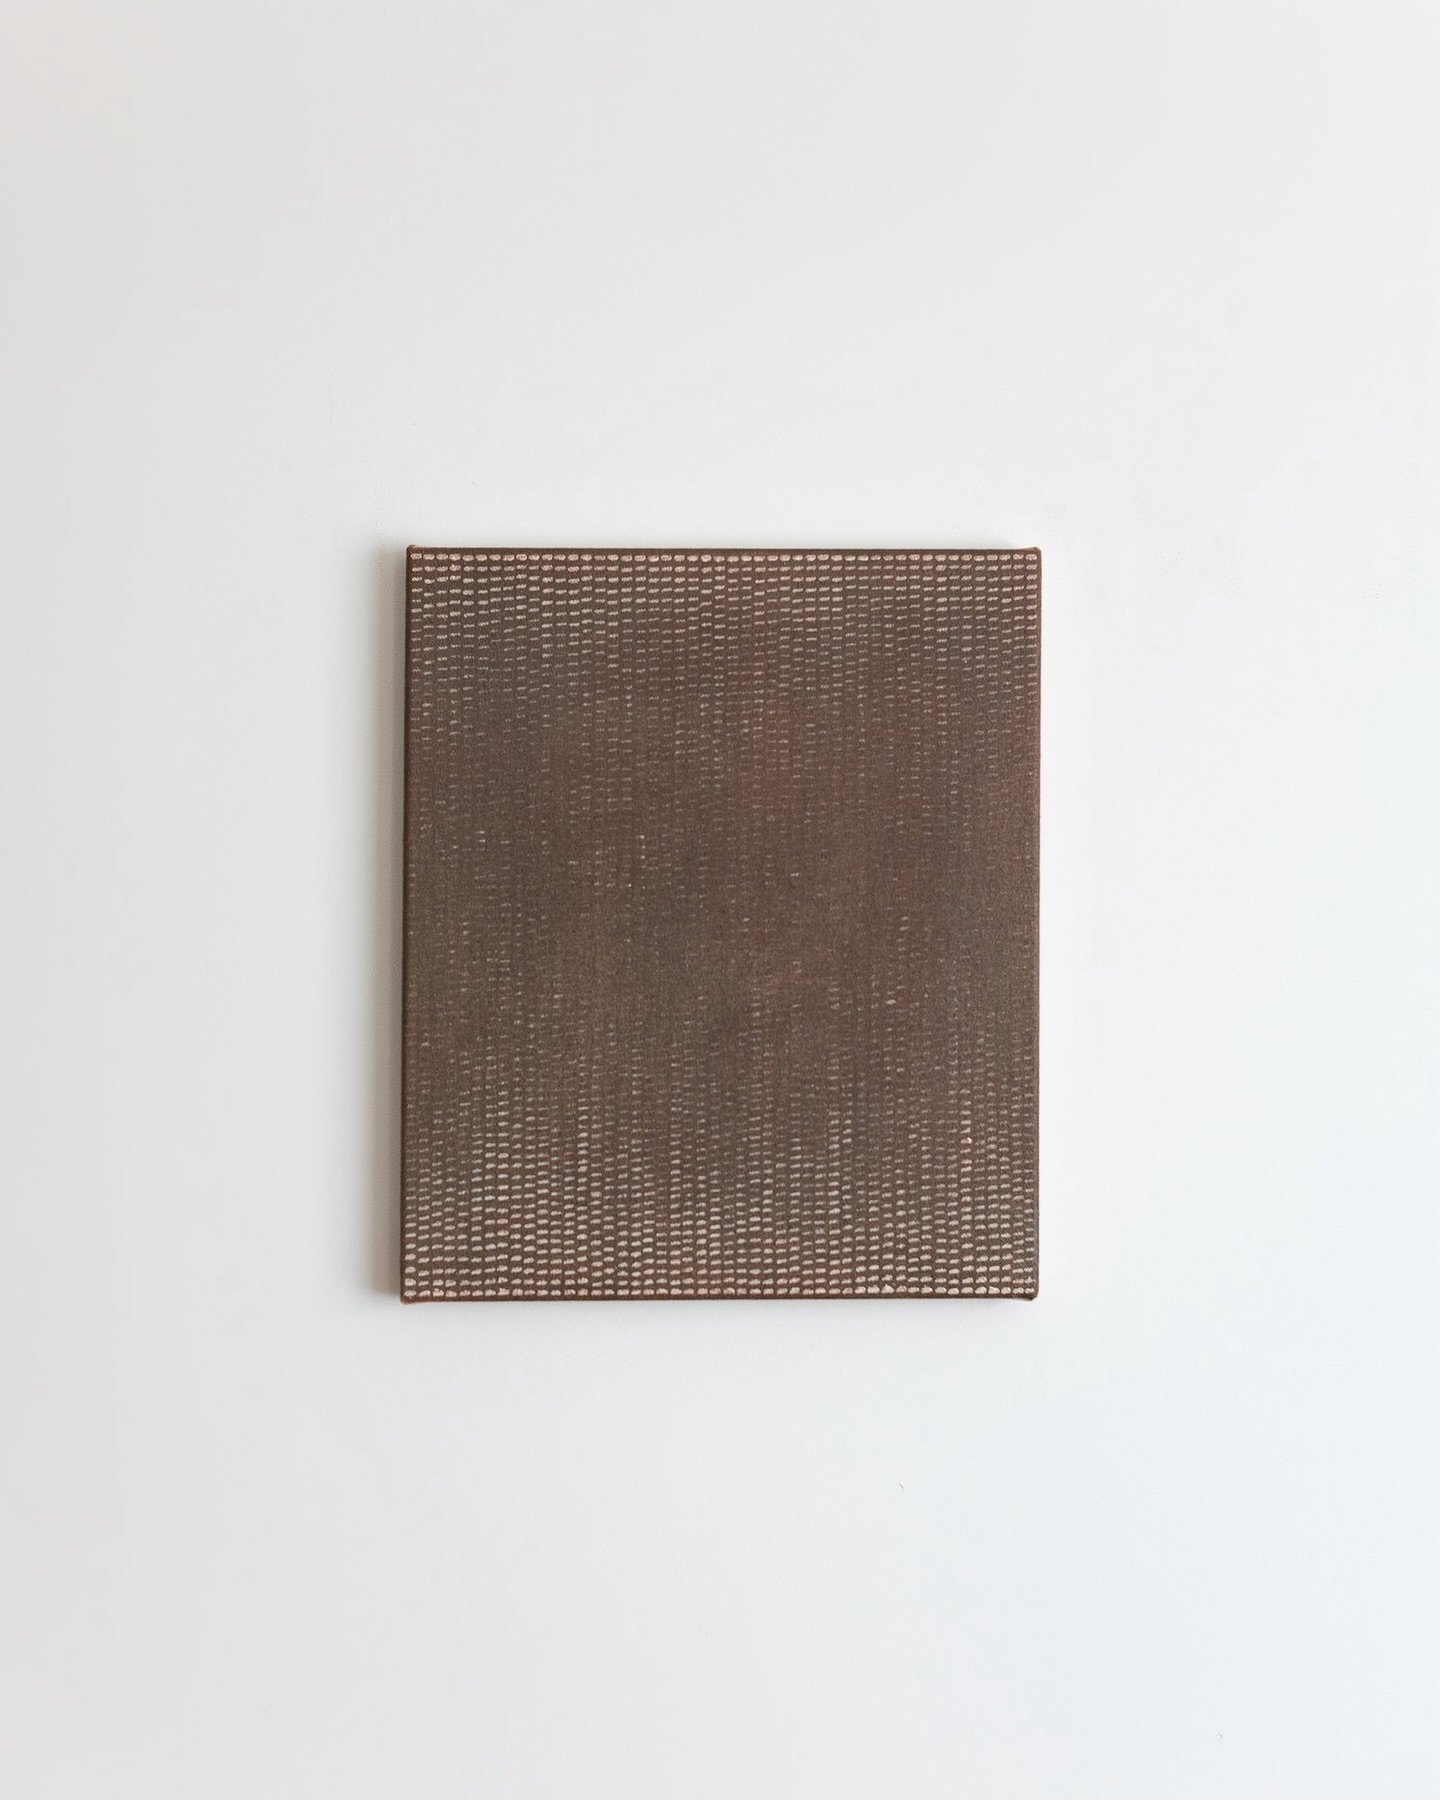 Cindy Leong &mdash; Storing Seeds 2304 (2024) &mdash; Oil on Linen &mdash; 30.5 cm x 35.6 cm 

Cindy Leong&rsquo;s delicate, minimalist works encourage quiet contemplation. Born in Aotearoa / New Zealand with Malaysian-Chinese heritage, Leong&rsquo;s